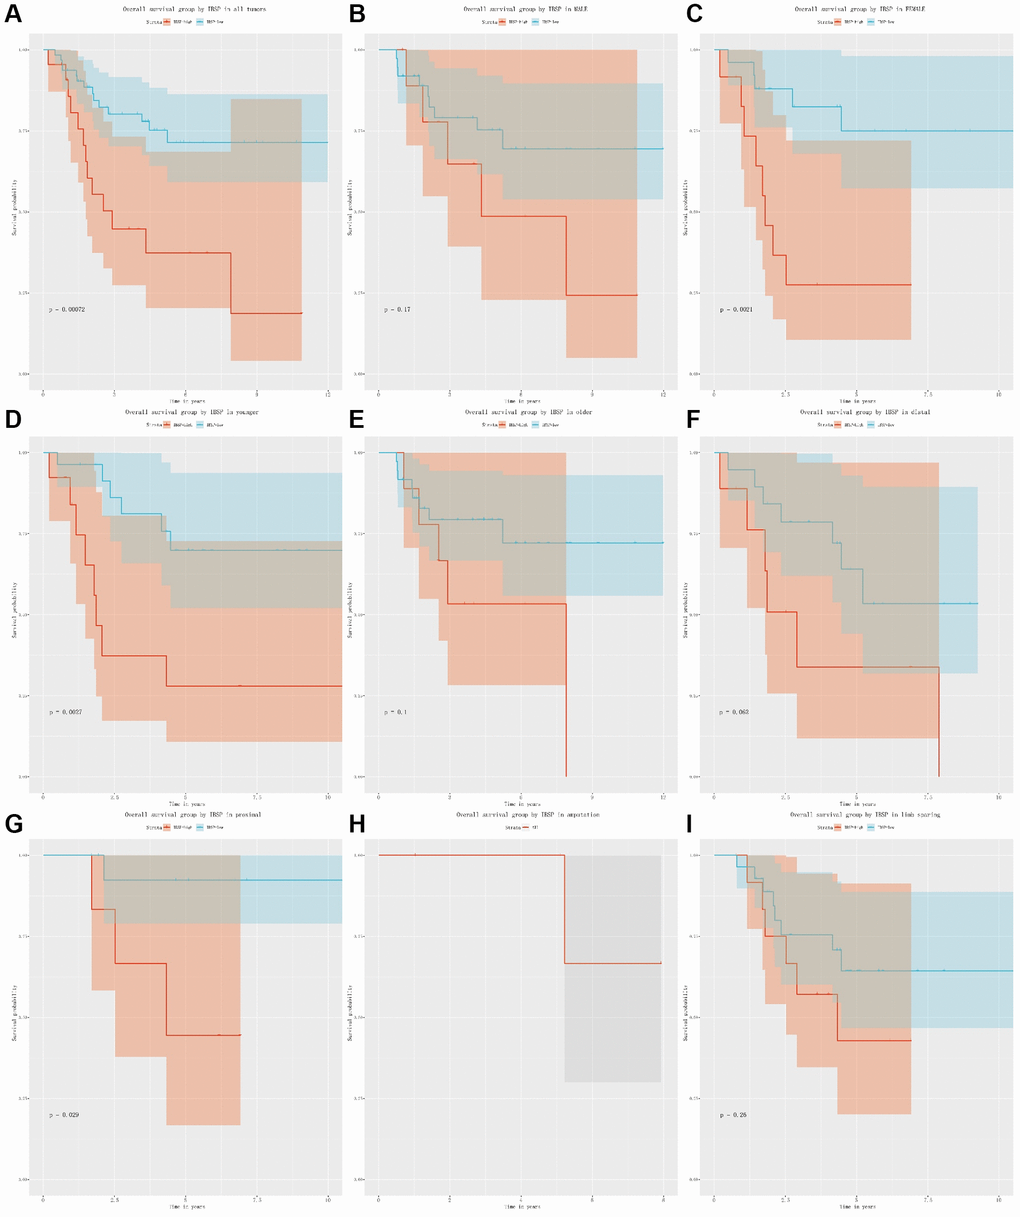 The relationship between IBSP expression and overall survival. (A) Overall survival group by IBSP in all tumors. (B–I) Overall survival group by IBSP in male, female, younger, older, distal, proximal, amputation, and limb sparing.